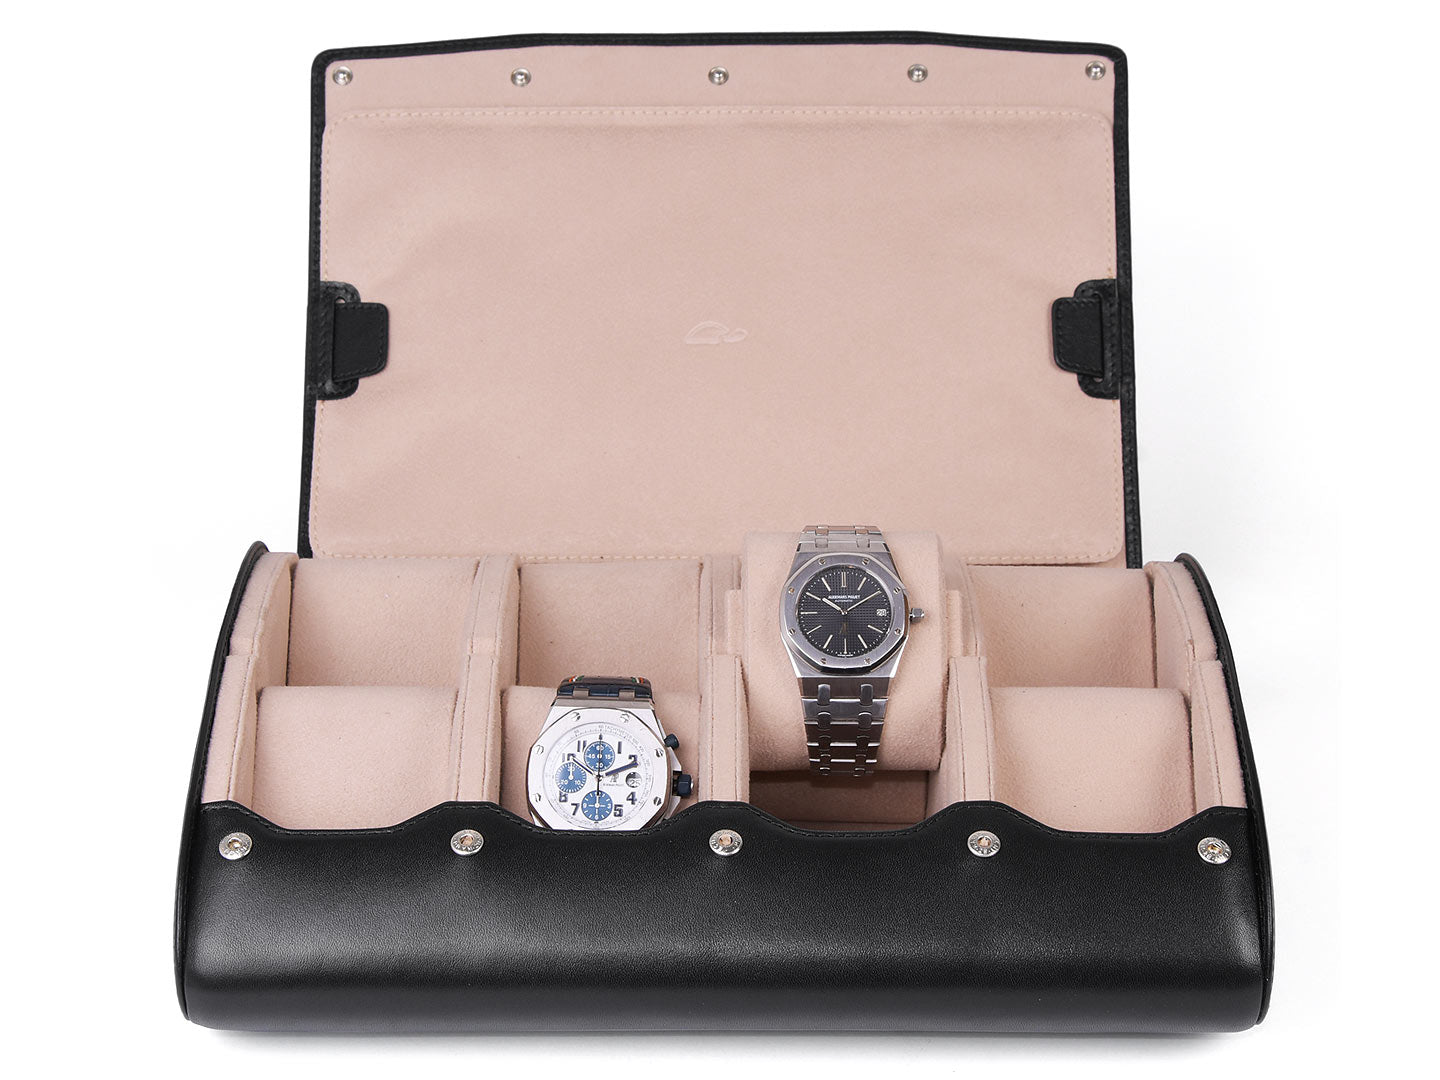 CARAPAZ-8-watches-box-open-black-leather